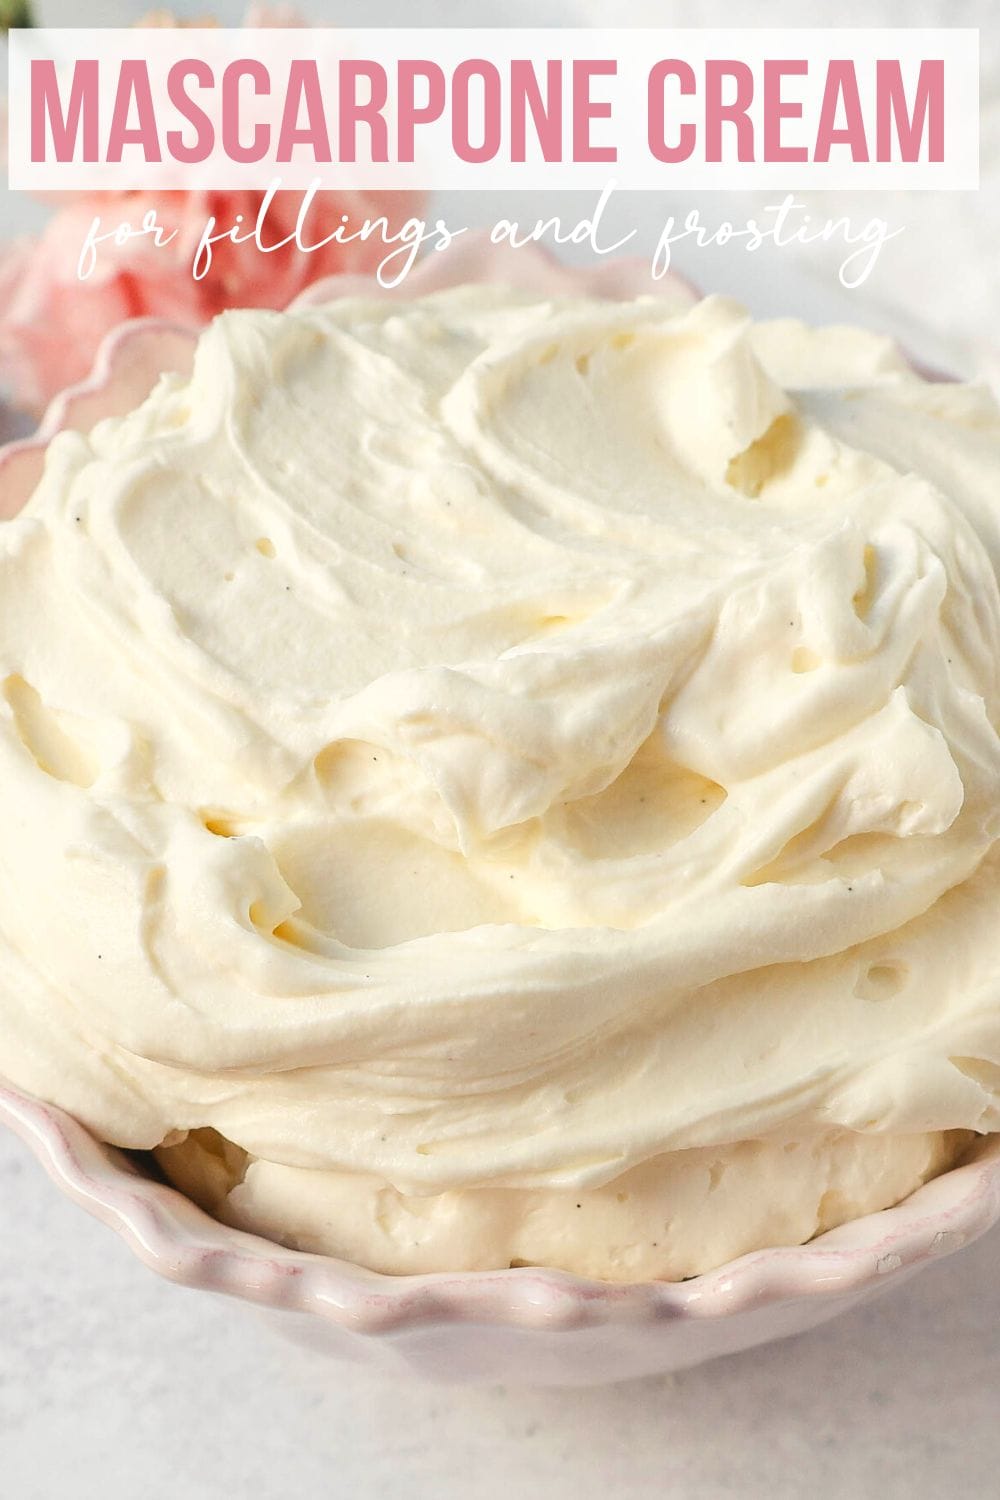 Creamy mascarpone cream is the most delicious and luxurious cake filling, dessert filling, or the perfect spread on any dessert. This Mascarpone Frosting is made with heavy cream, mascarpone cheese, powdered sugar, and vanilla or almond extract. 